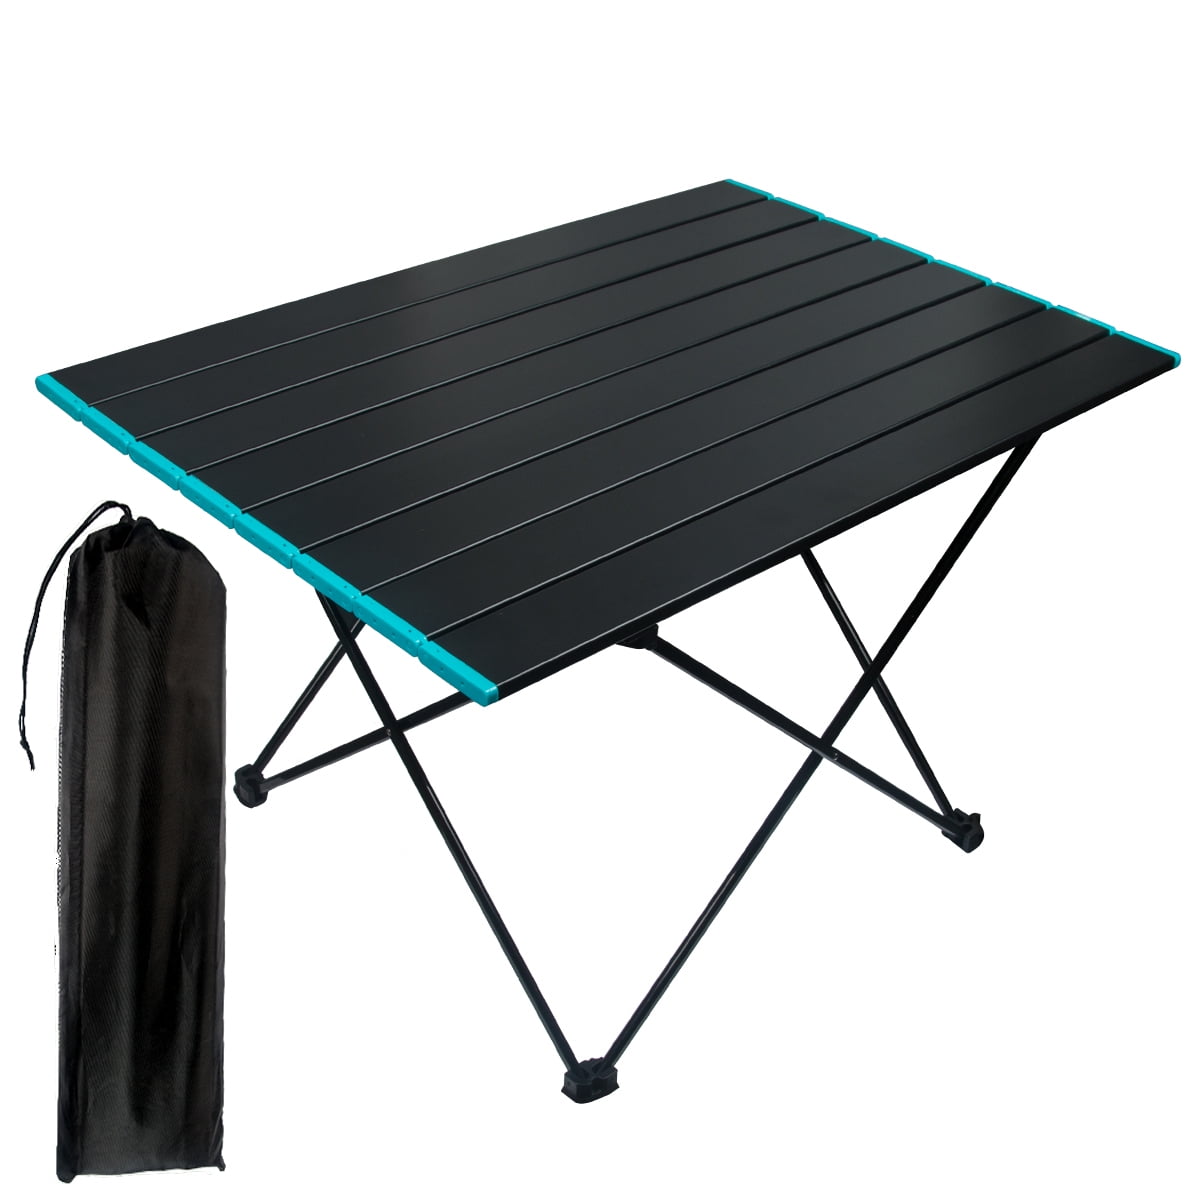 Beach Rectangle Portable Compact Lightweight Folding Roll-up Aluminum Table with Cup Holders Small Light Easy to Carry Camp Foldable Camping Picnic Tables Indoor Outdoor 